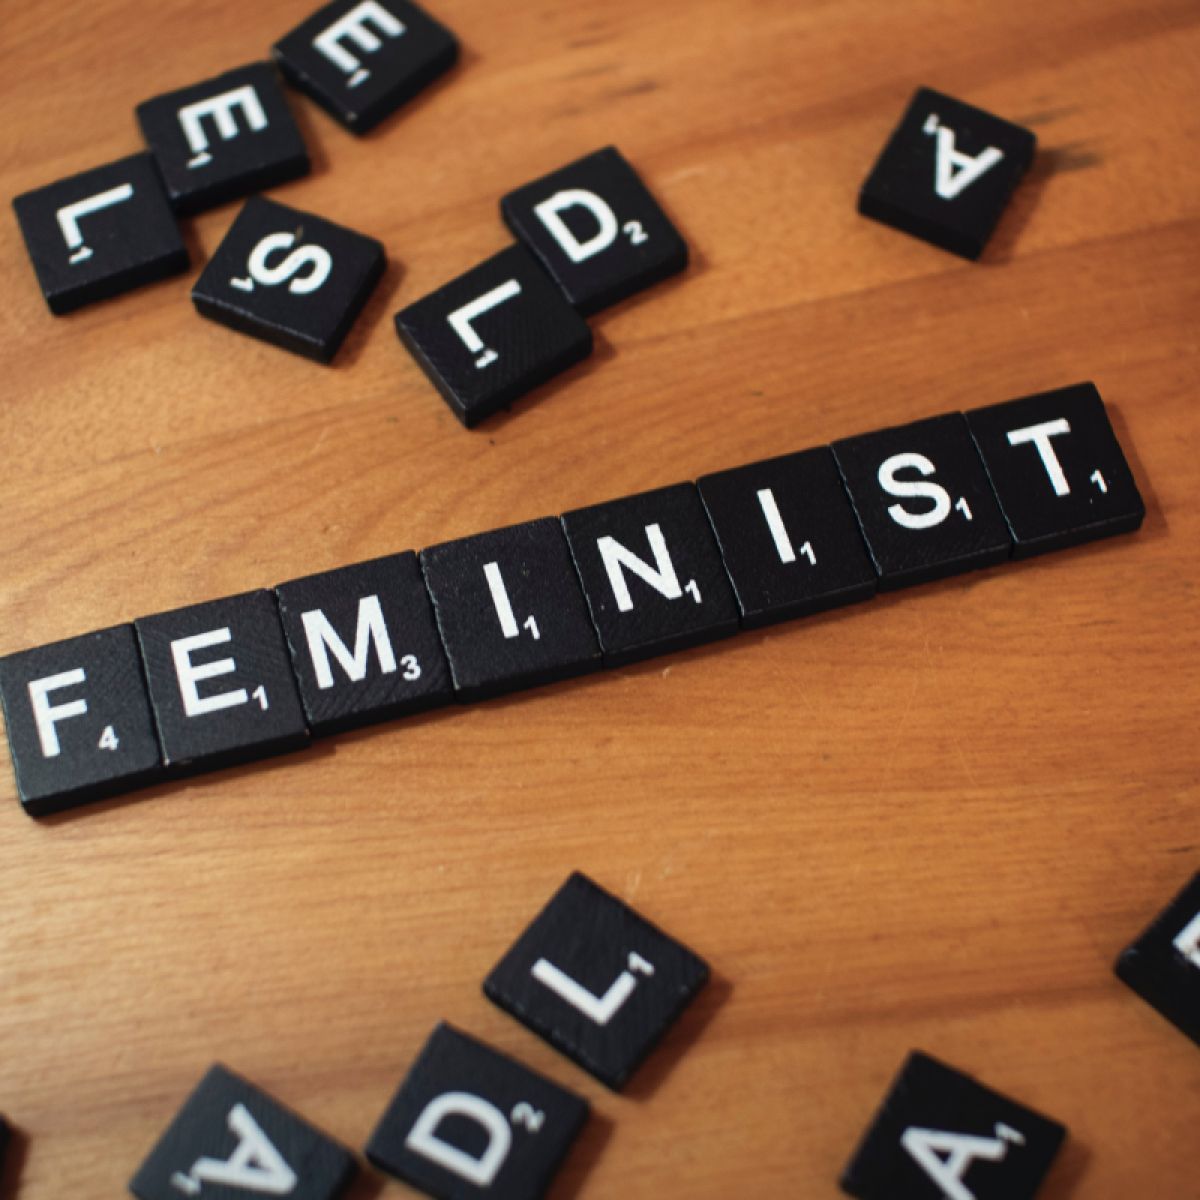 Yes! 4 Ways Feminism Can Make You Better In Bed - Everyday Feminism